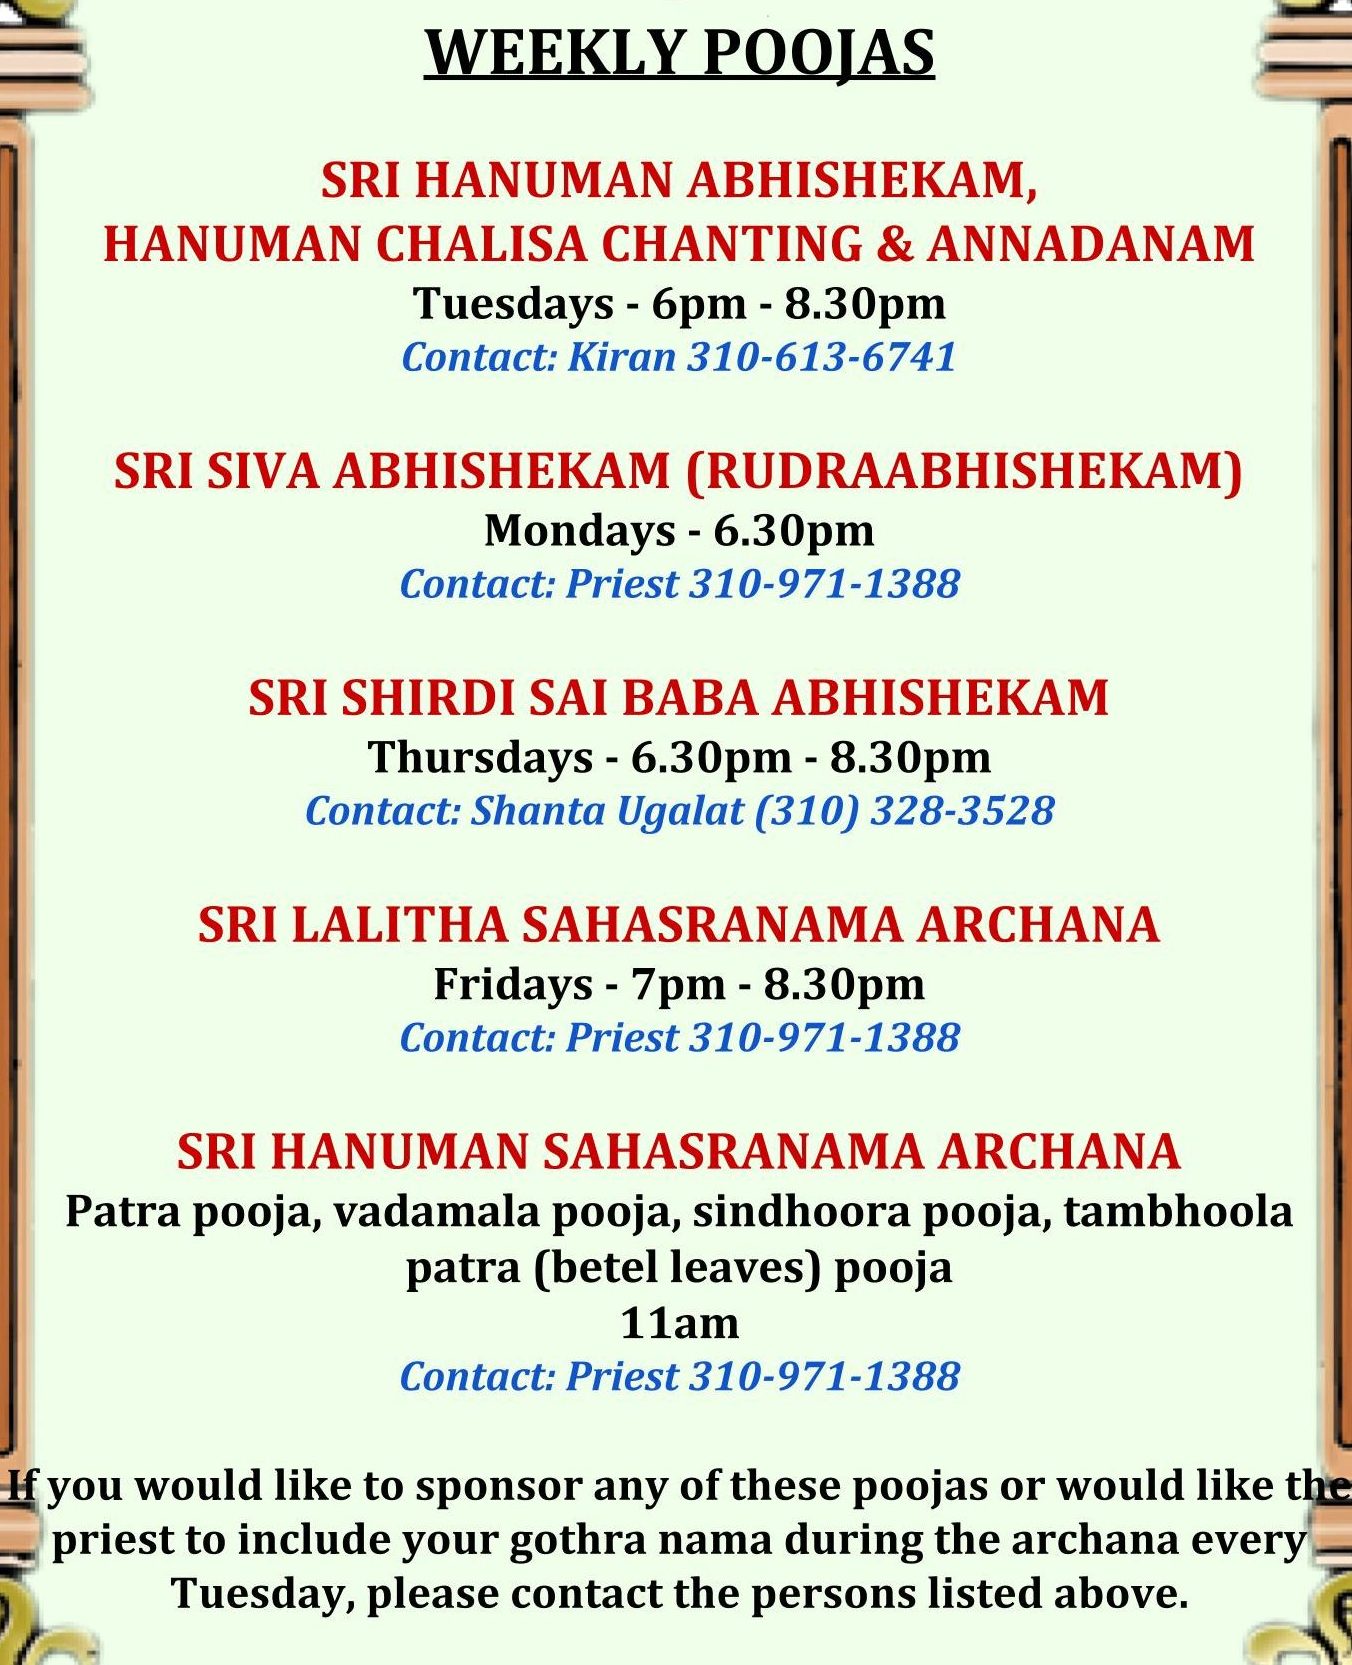 weekly poojas for email image (1)